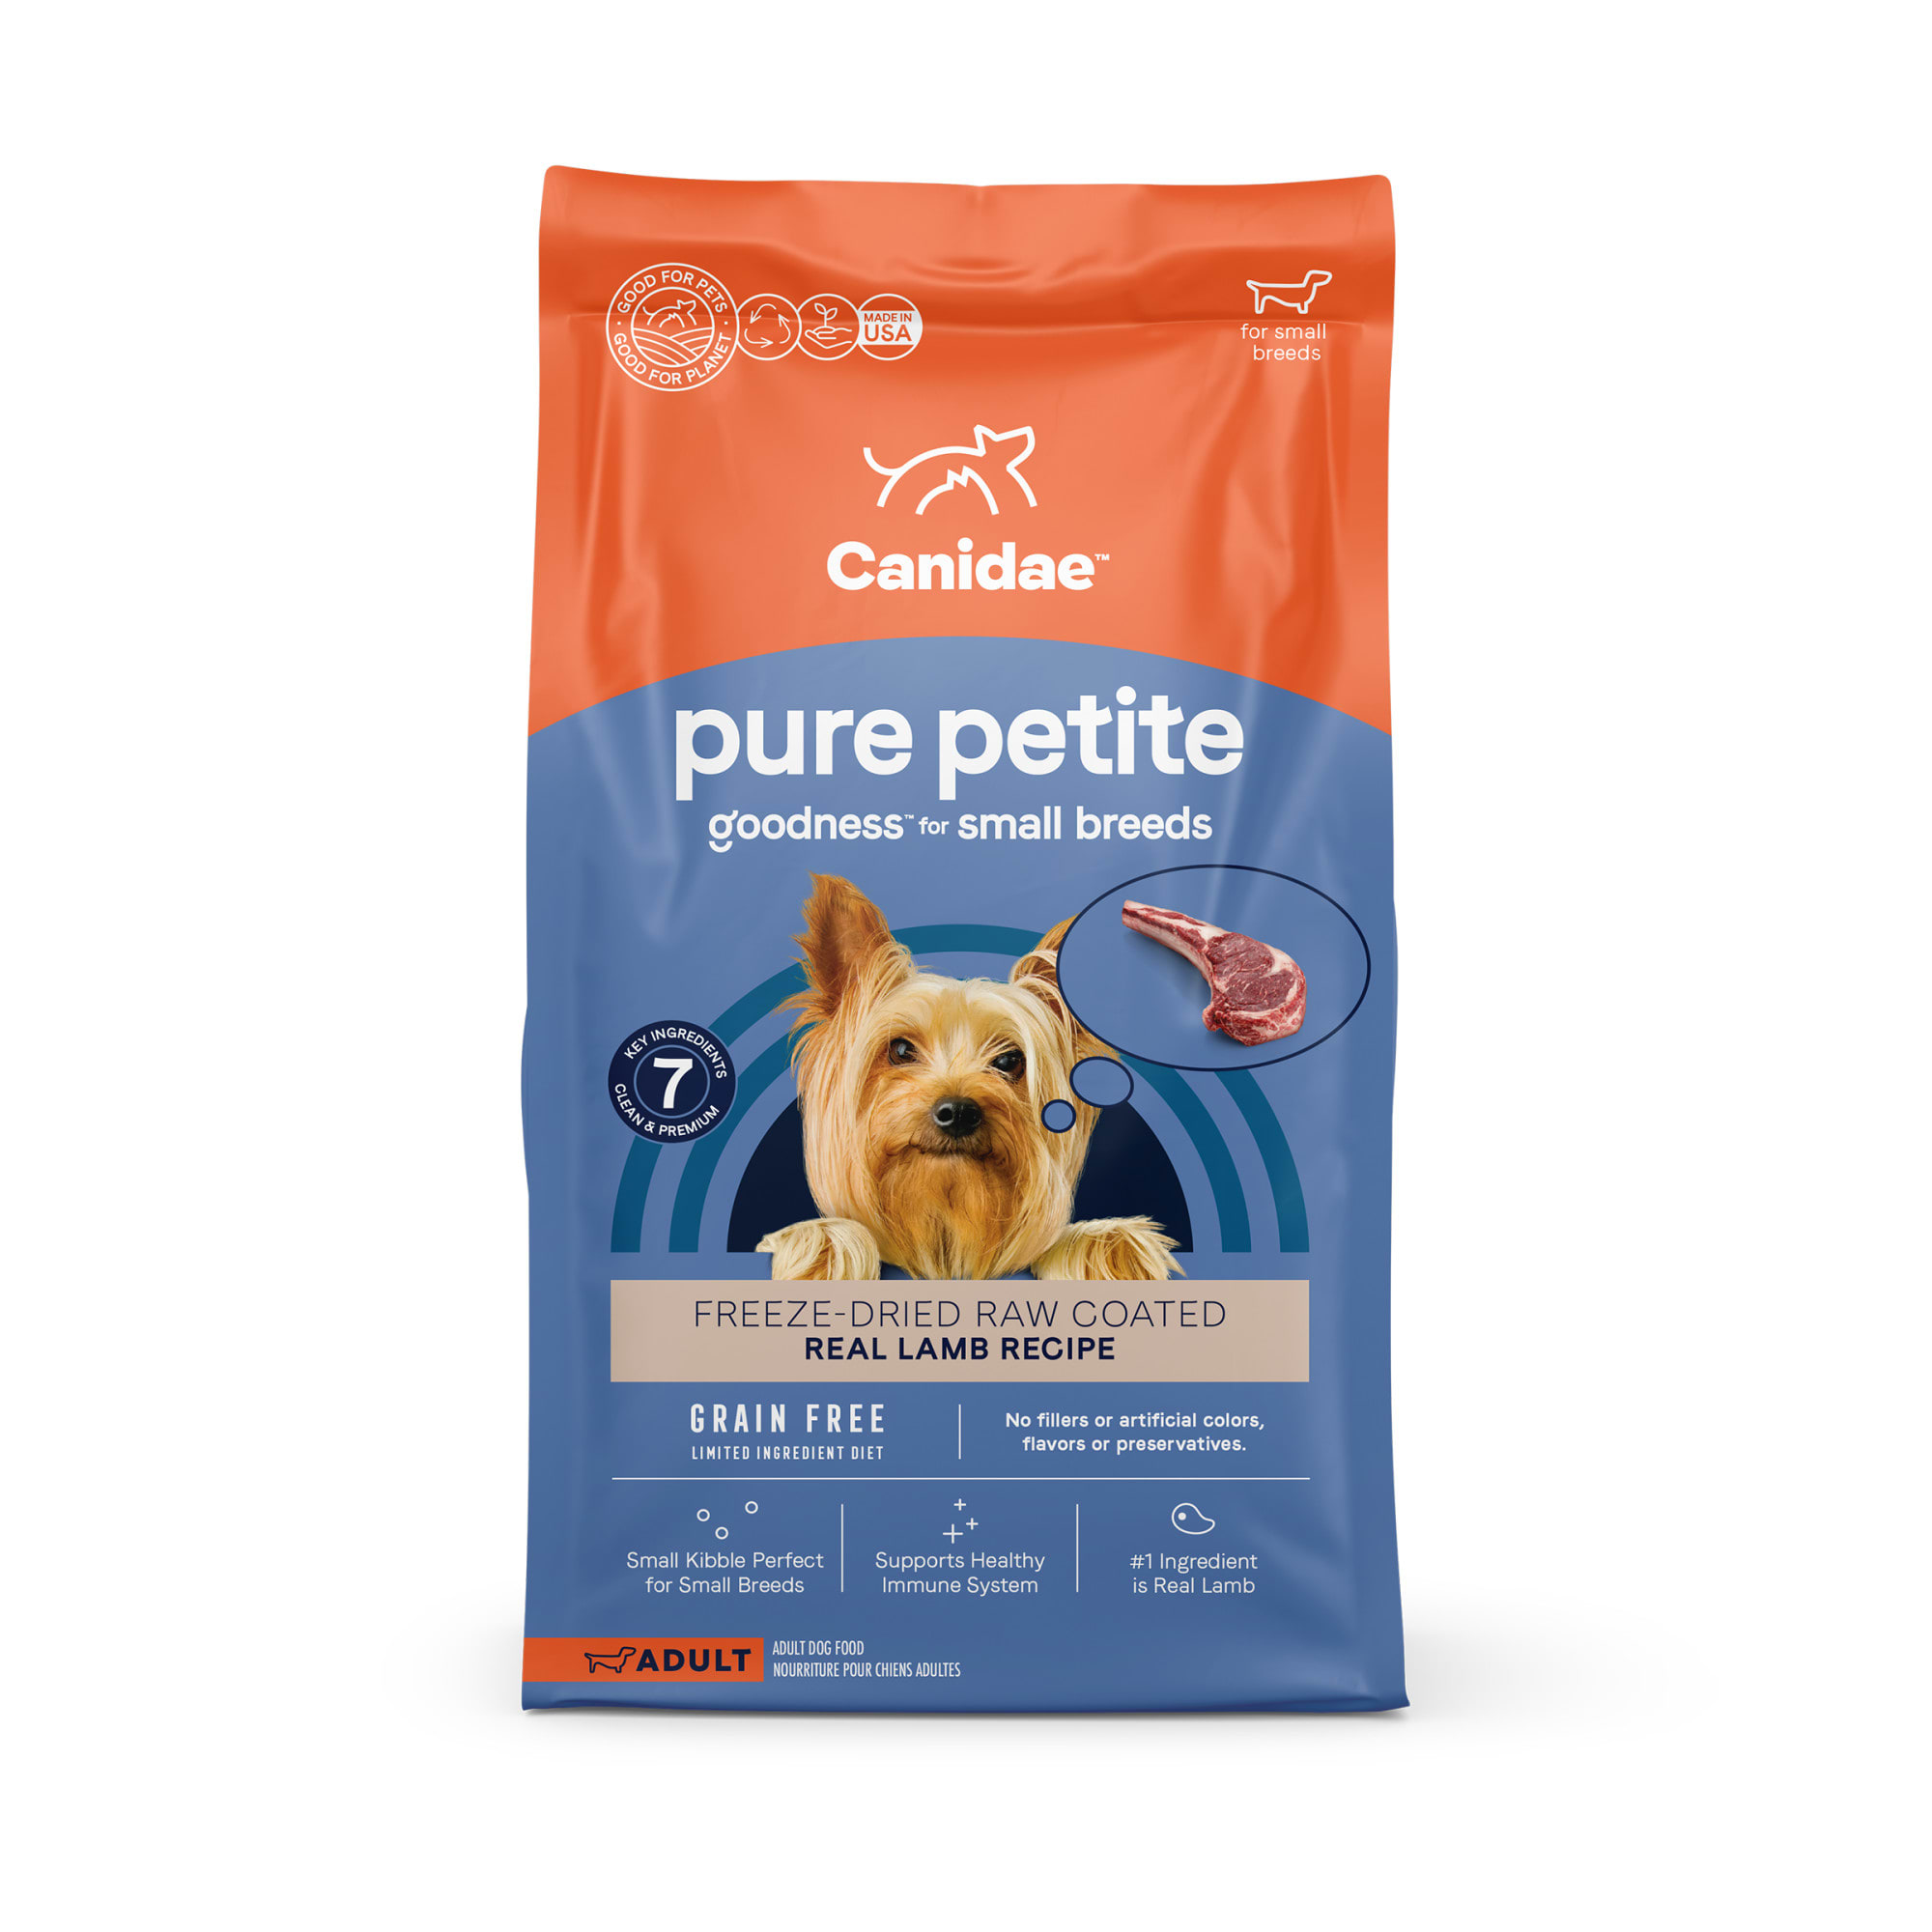 Photos - Dog Food Canidae Pure Grain Free Petite Small Breed Limited Ingredient Diet 